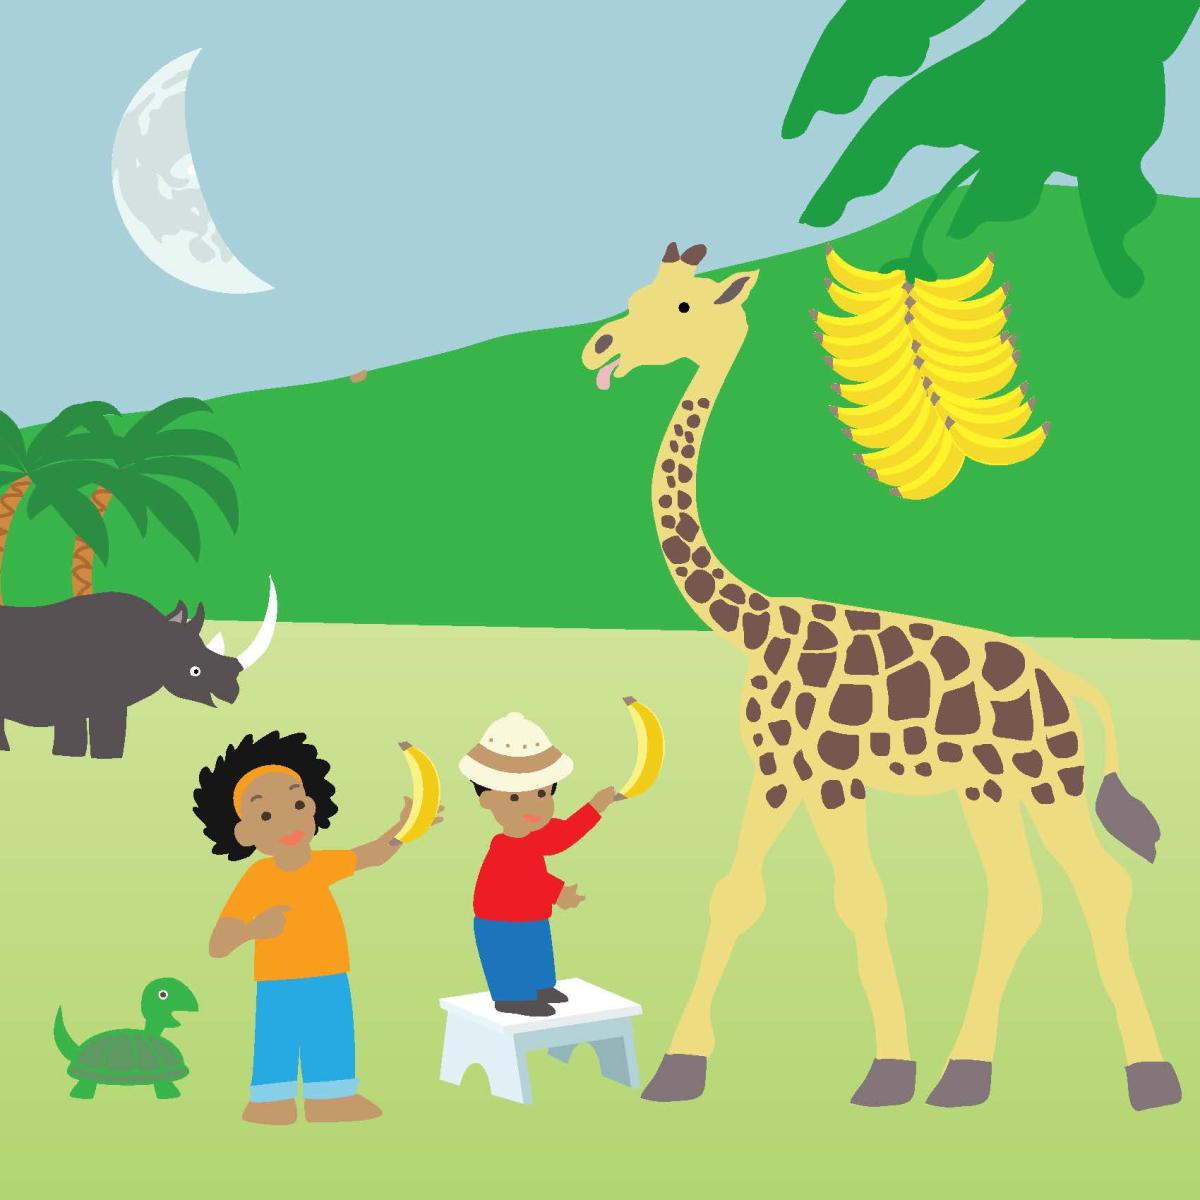 Illustration from the Breakfast Moon book featuring two kids offering a banana to a giraffe